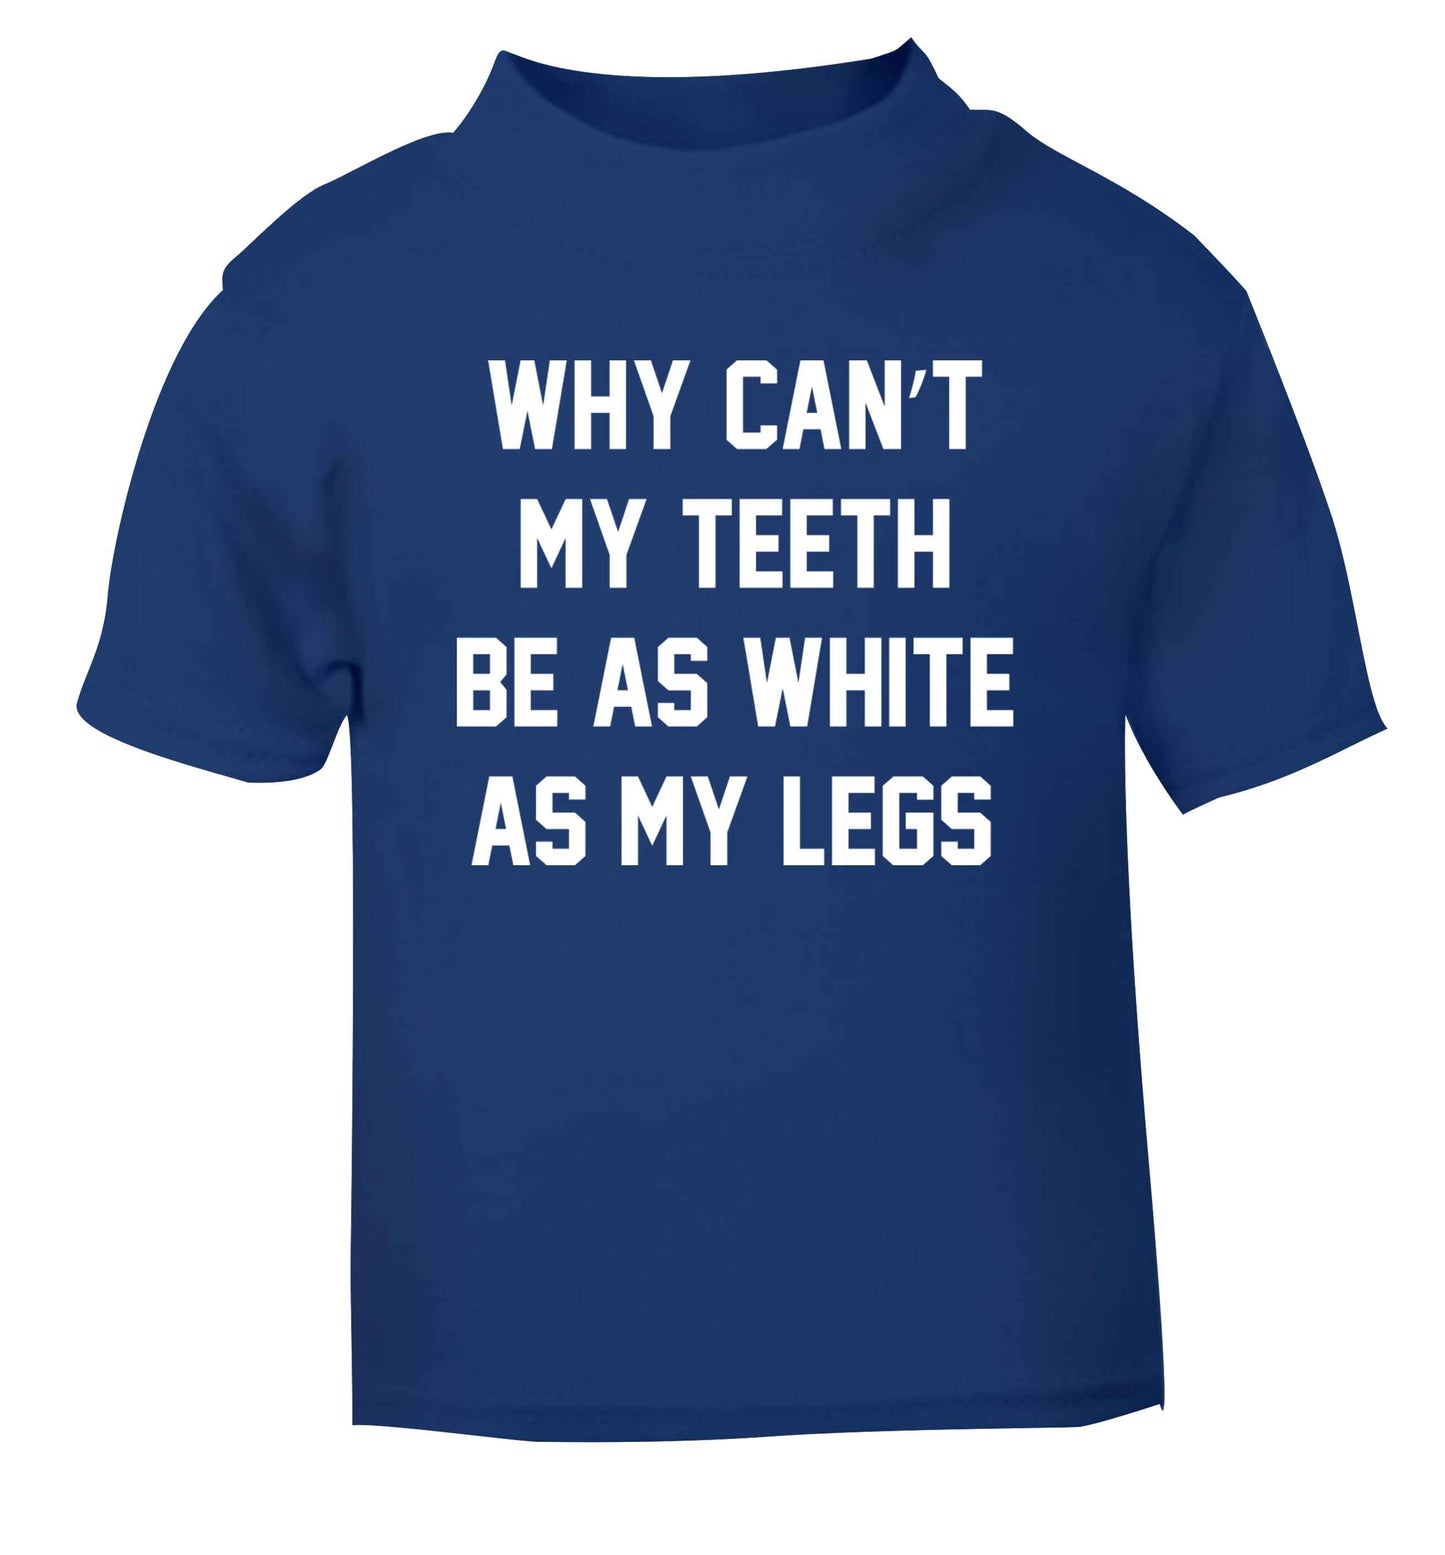 Why can't my teeth be as white as my legs blue Baby Toddler Tshirt 2 Years